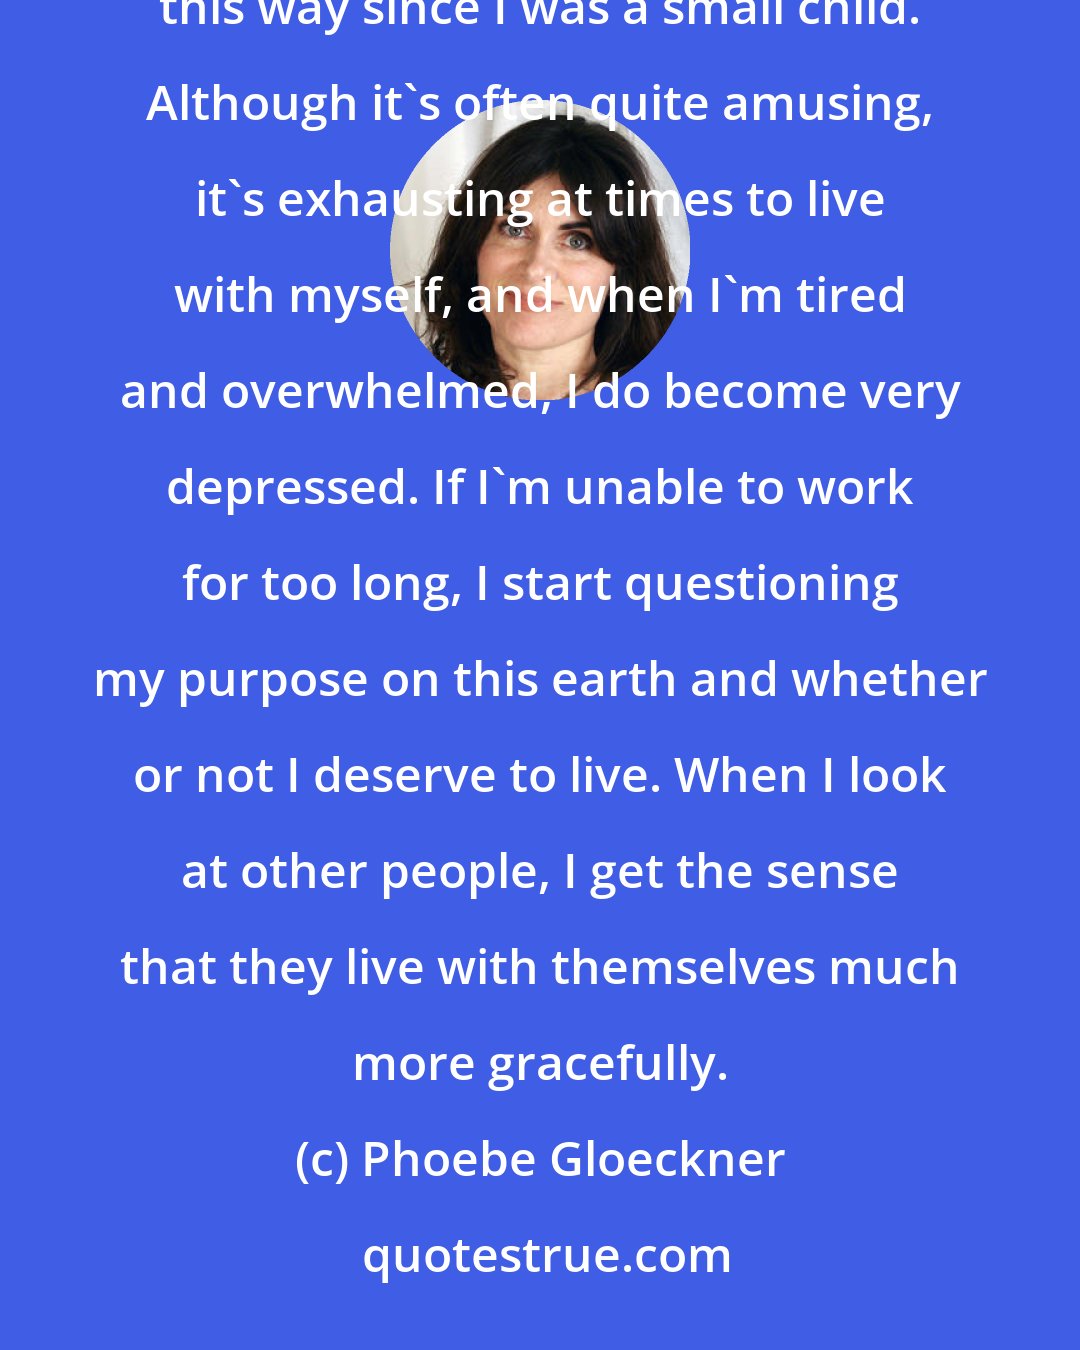 Phoebe Gloeckner: I'd describe my inner life as constantly vigilant, always ready to flee or respond with violence. I've felt this way since I was a small child. Although it's often quite amusing, it's exhausting at times to live with myself, and when I'm tired and overwhelmed, I do become very depressed. If I'm unable to work for too long, I start questioning my purpose on this earth and whether or not I deserve to live. When I look at other people, I get the sense that they live with themselves much more gracefully.